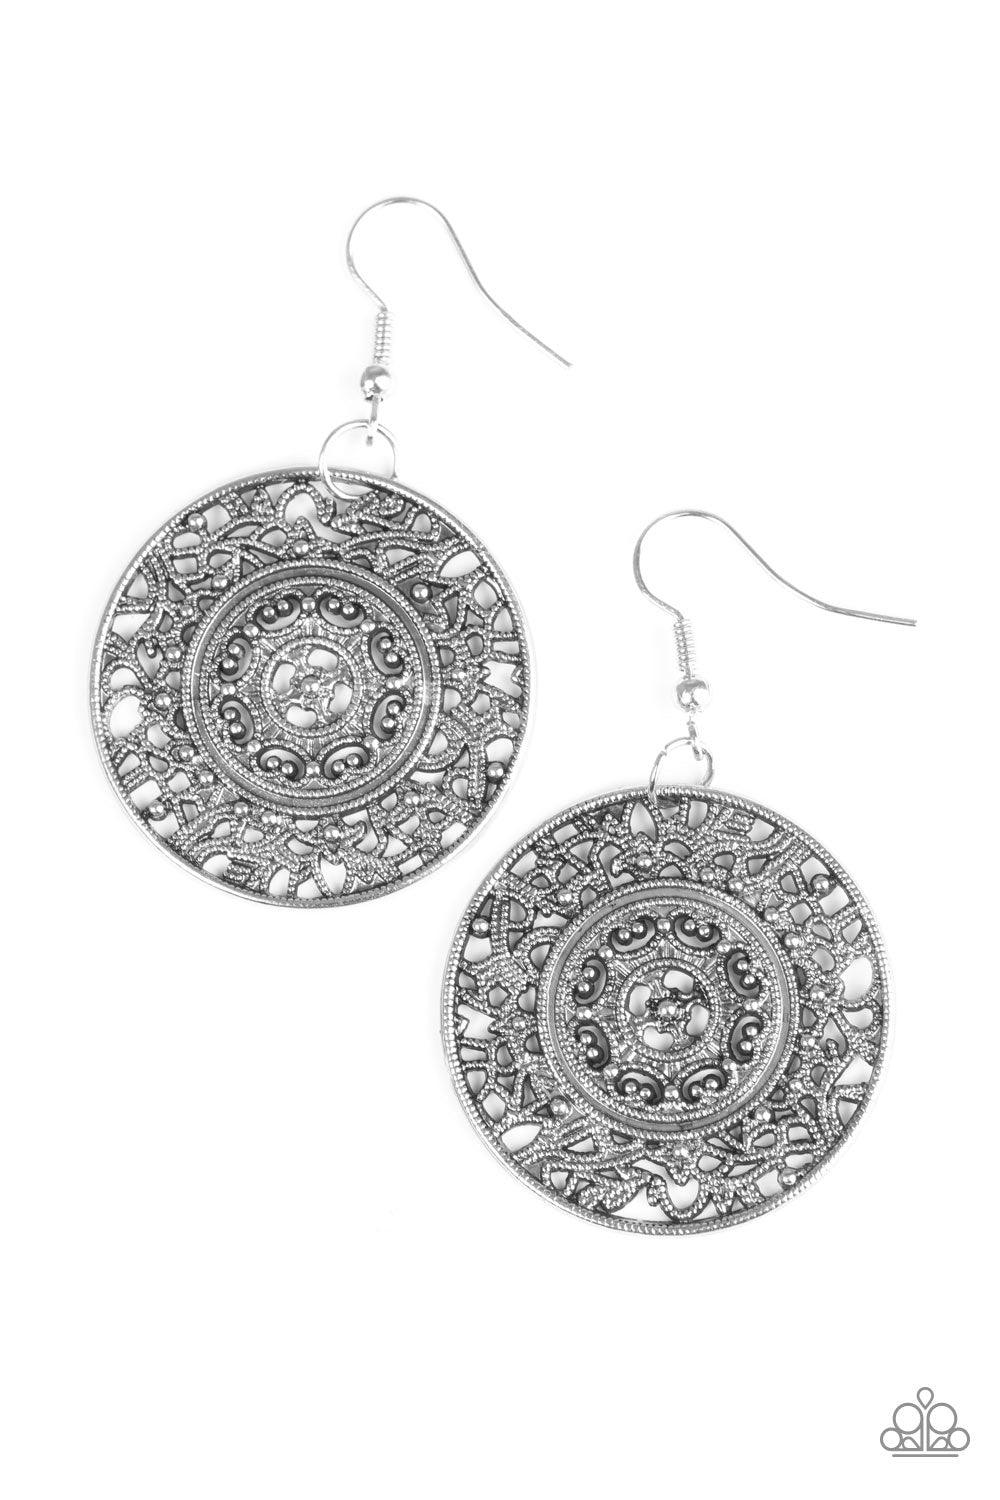 Paparazzi Accessories Say You WHEEL - Silver Brushed in an antiqued shimmer, dotted vine-like filigree swirls around a round frame for a tribal inspired look. Earring attaches to a standard fishhook fitting. Jewelry